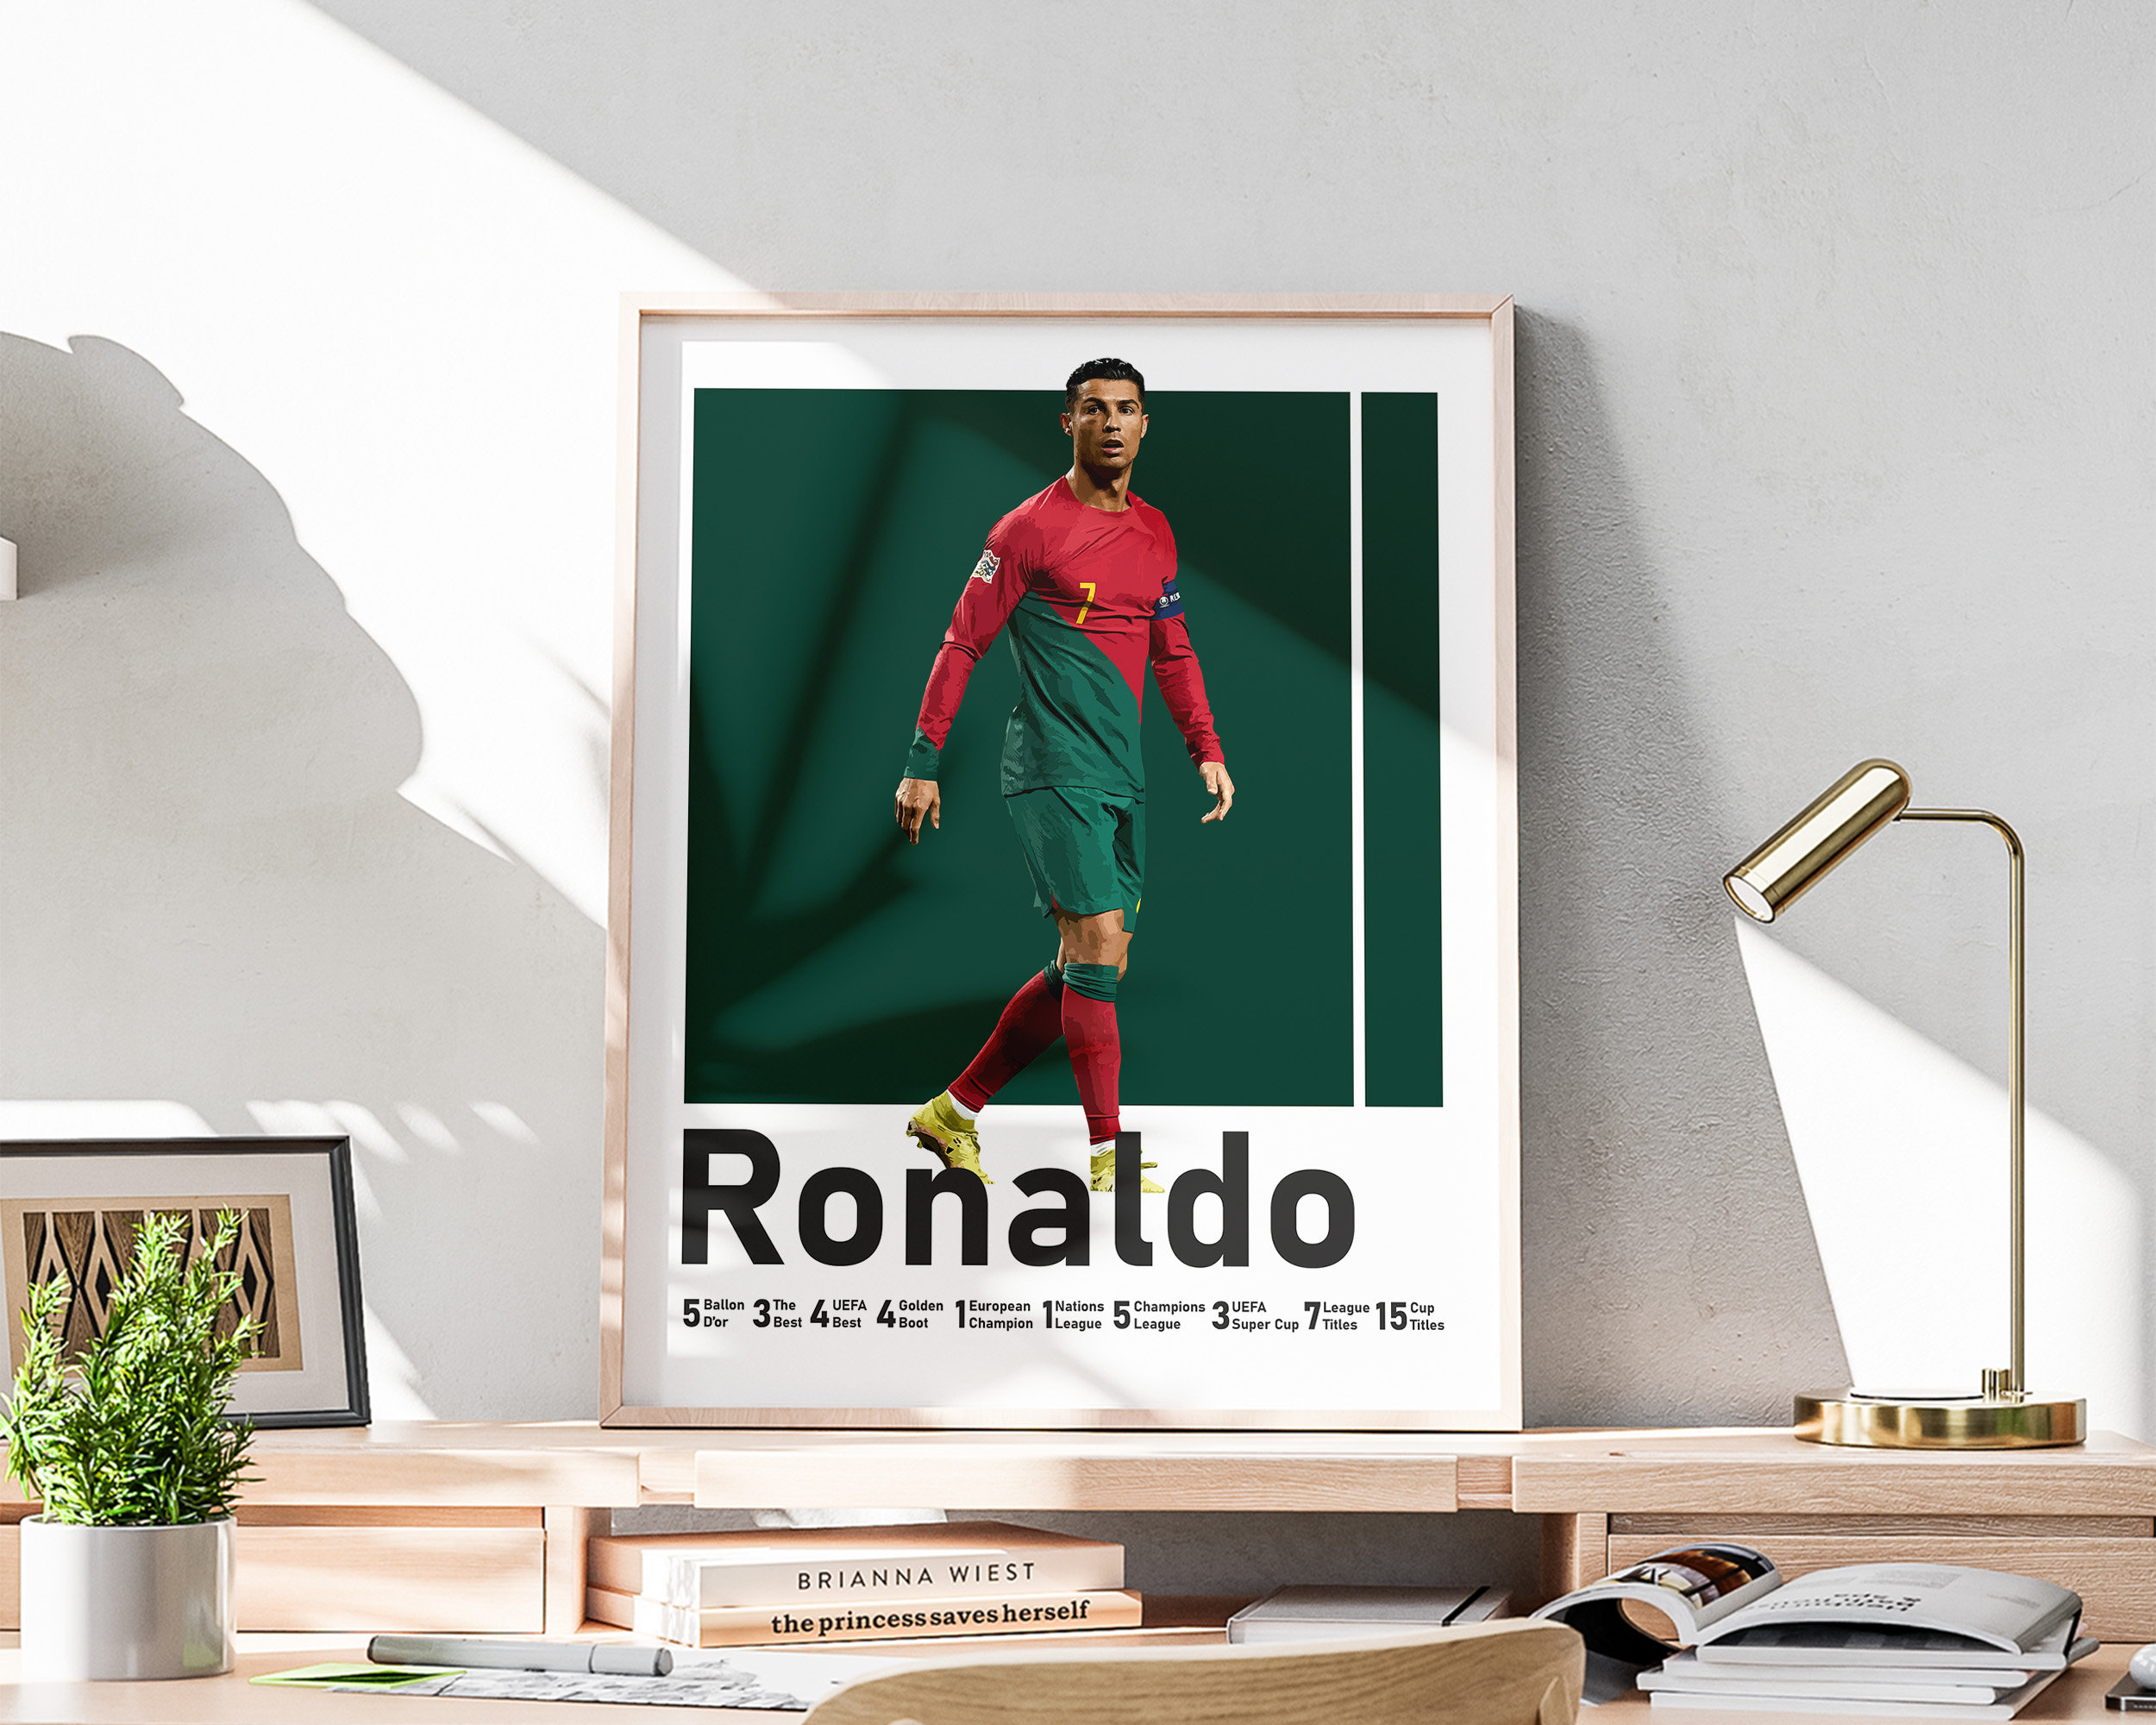 Cristiano Ronaldo CR7 Portugal/football World Cup Poster Wall Art  Waterproof Canvas Poster Wall Decor Hanging Metal Poster Signs for Home boy  gift